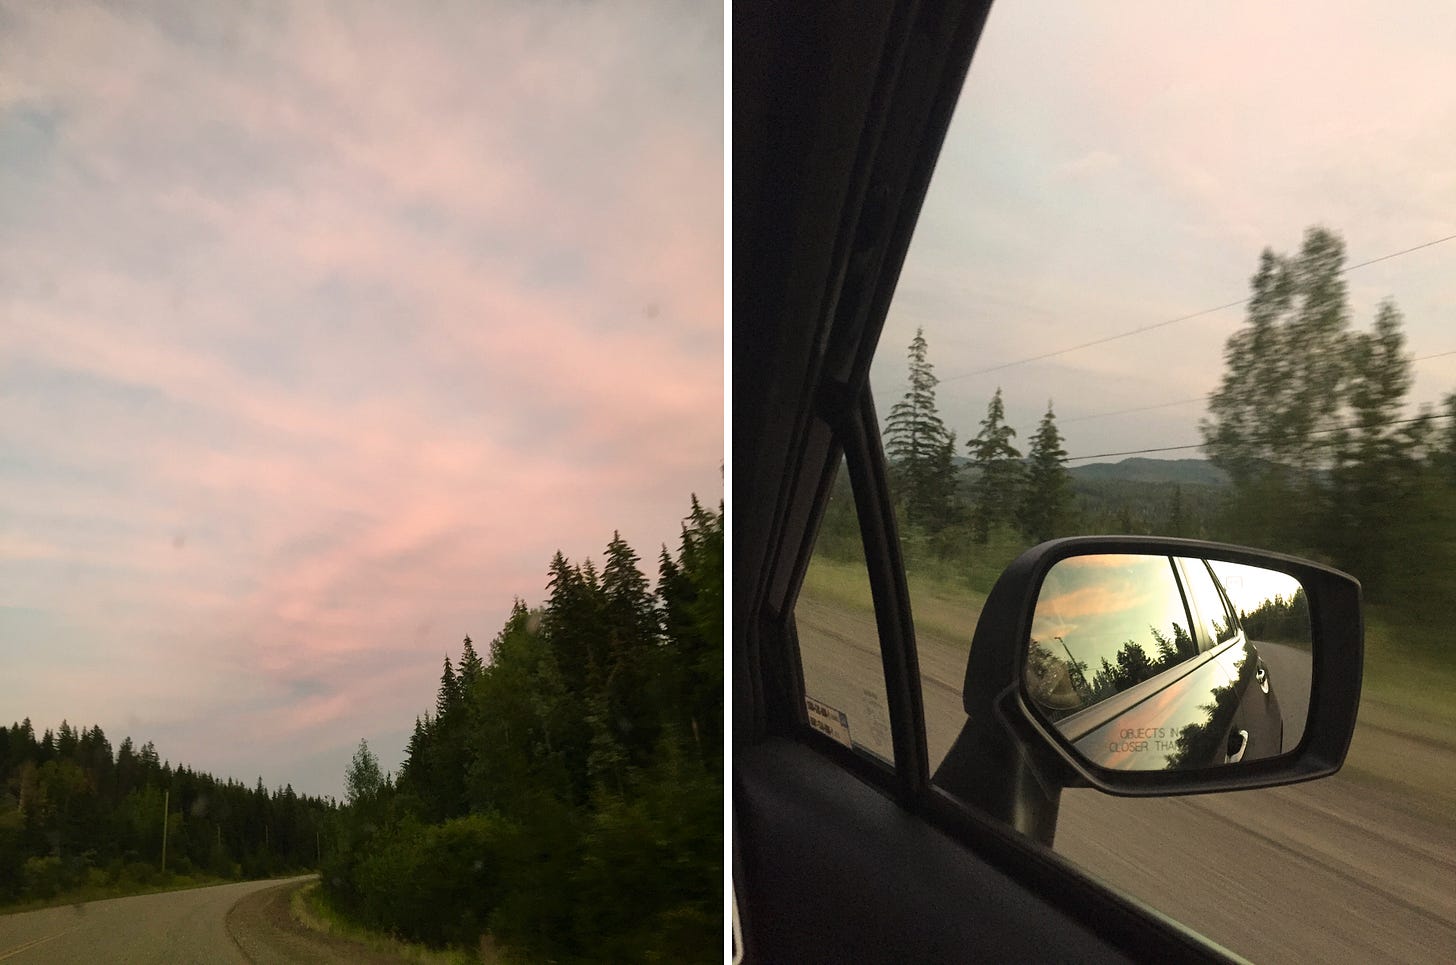 Left image: a curve in an empty road, heavily lined with trees on both sides. The sky is cotton candy pink and blue in the sunset. Right image: out the passenger side window, the sunset and trees are visible in the side mirror. The road flies by in the background.